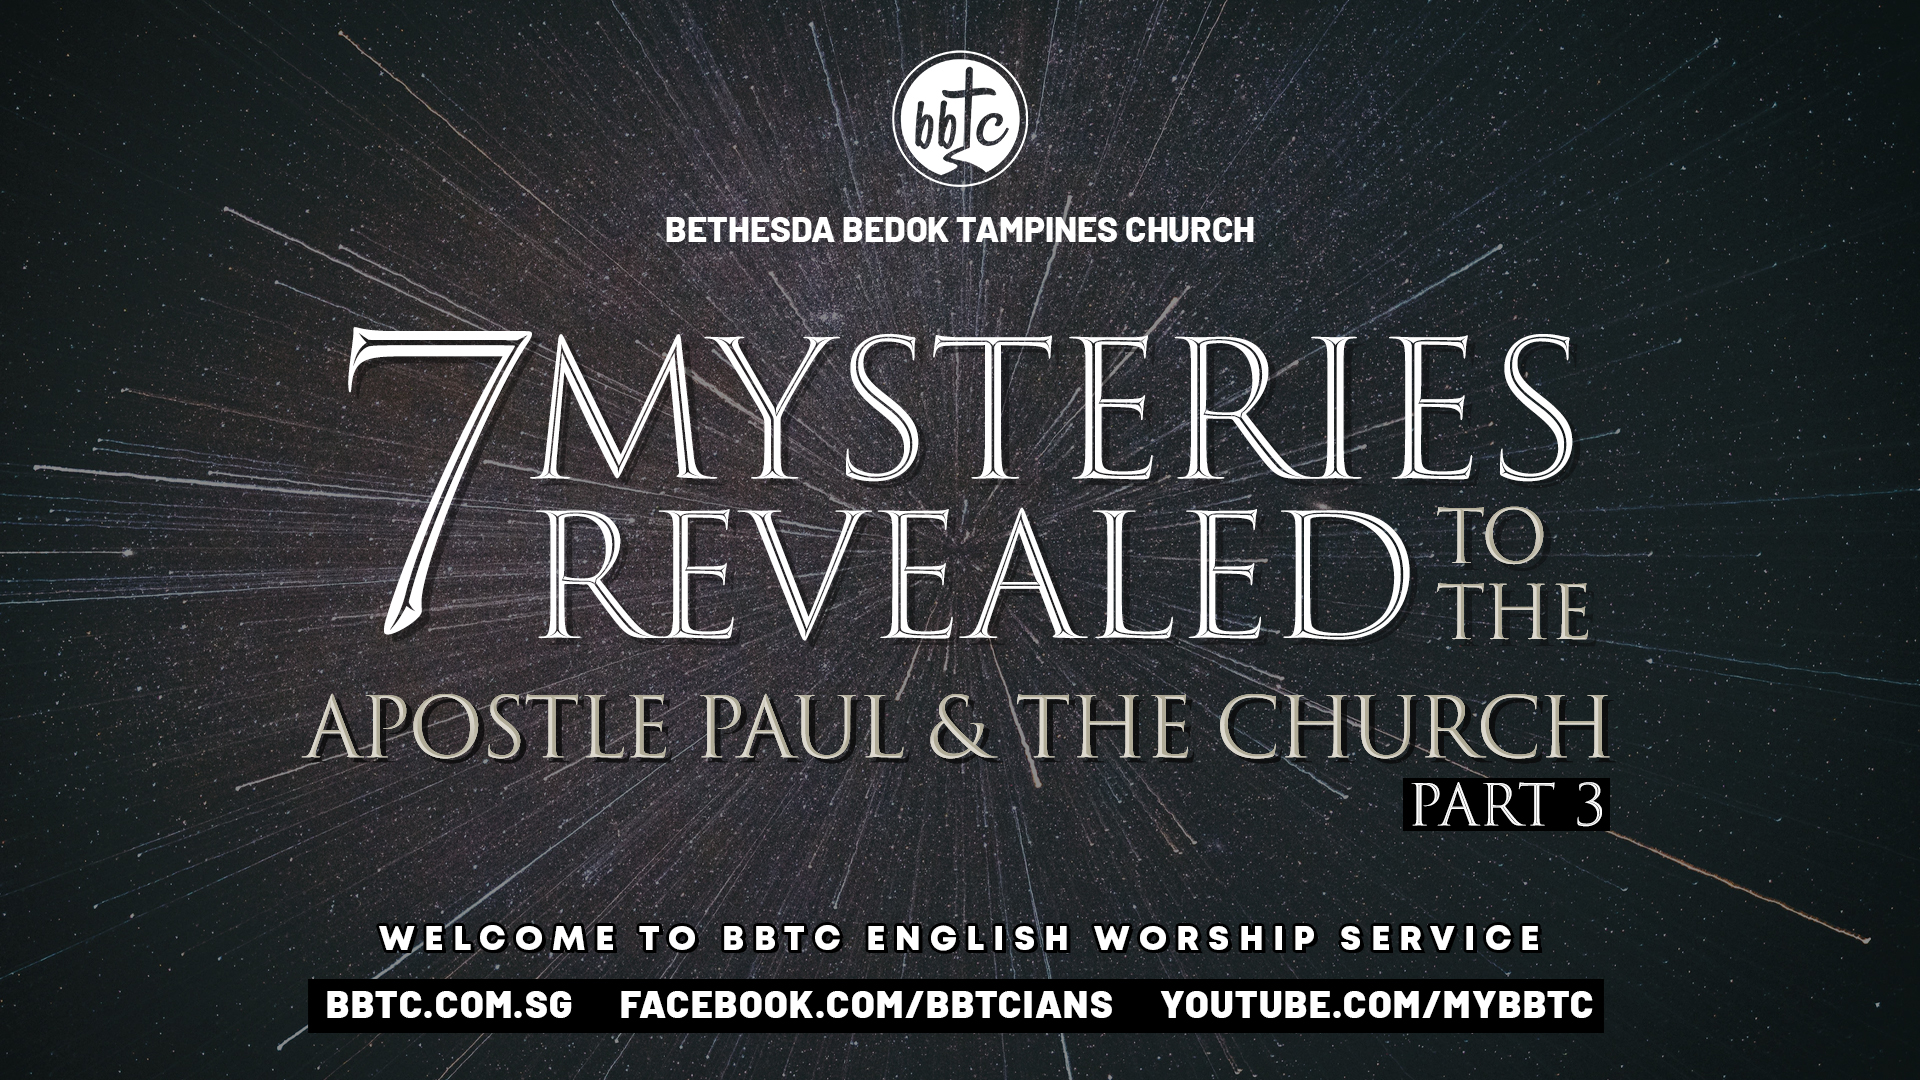 7 MYSTERIES REVEALED TO THE APOSTLE PAUL AND THE CHURCH (PART 3)